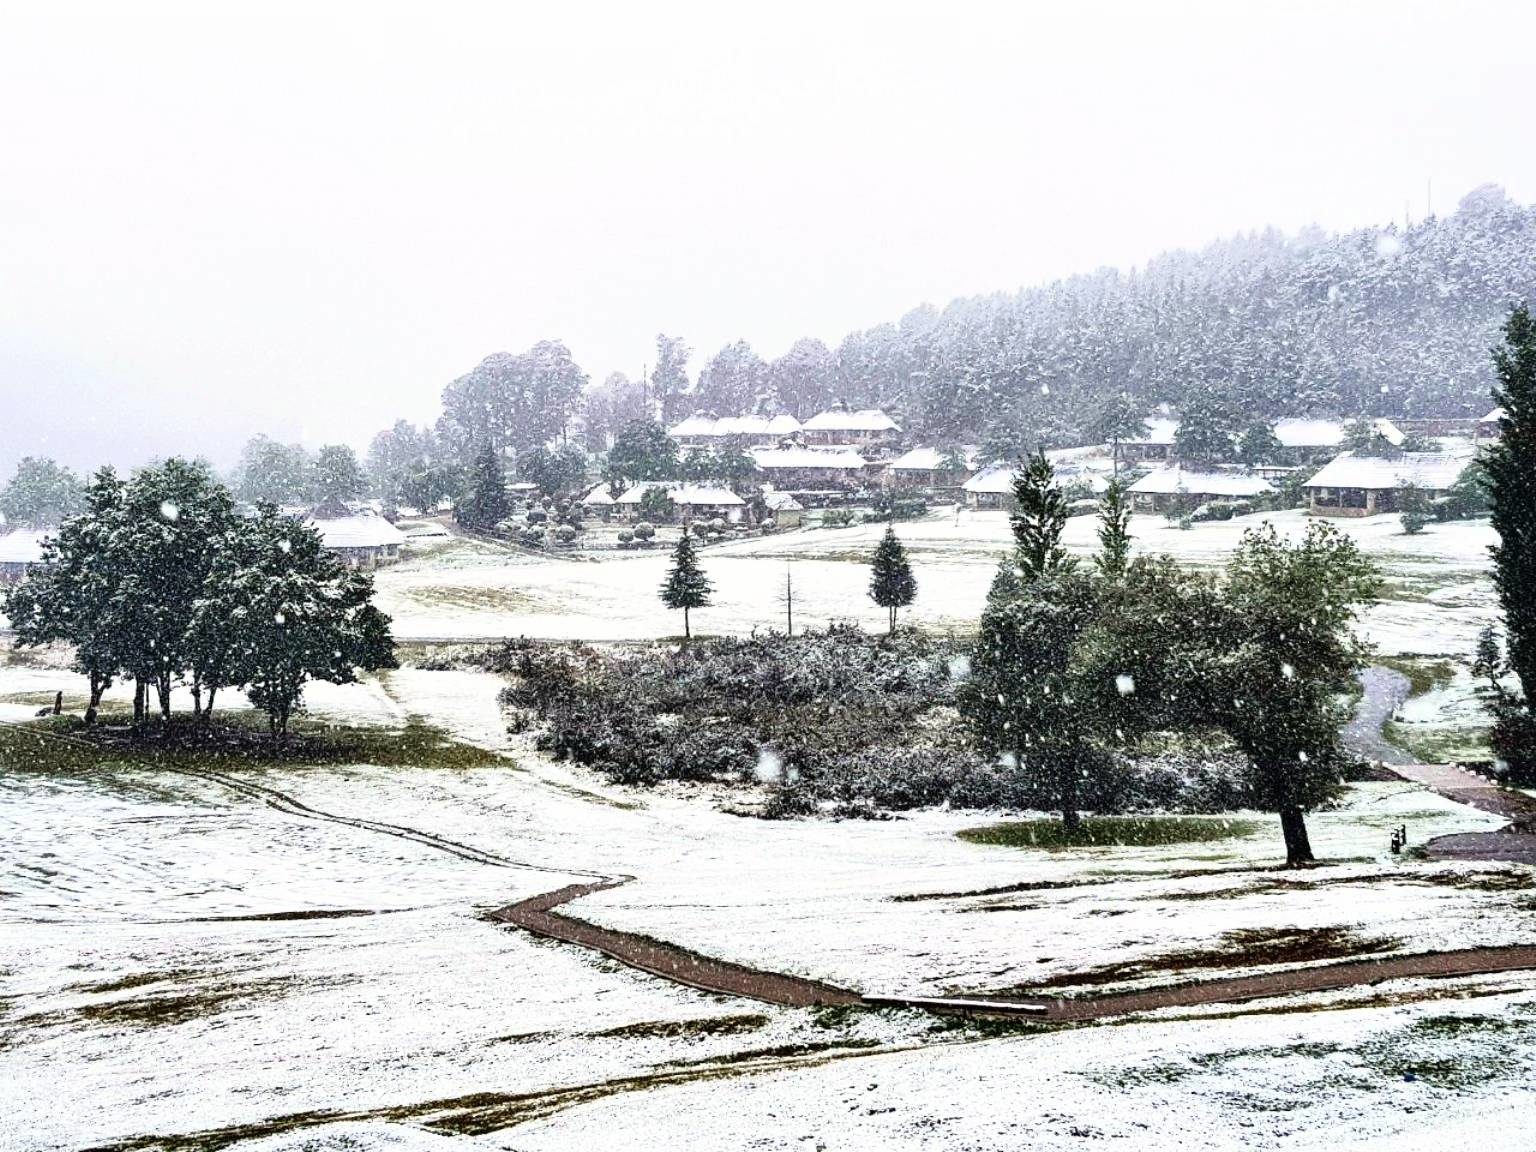 A light snowfall dusts the Fairways at the Drakensberg Gardens resort in the southern Berg